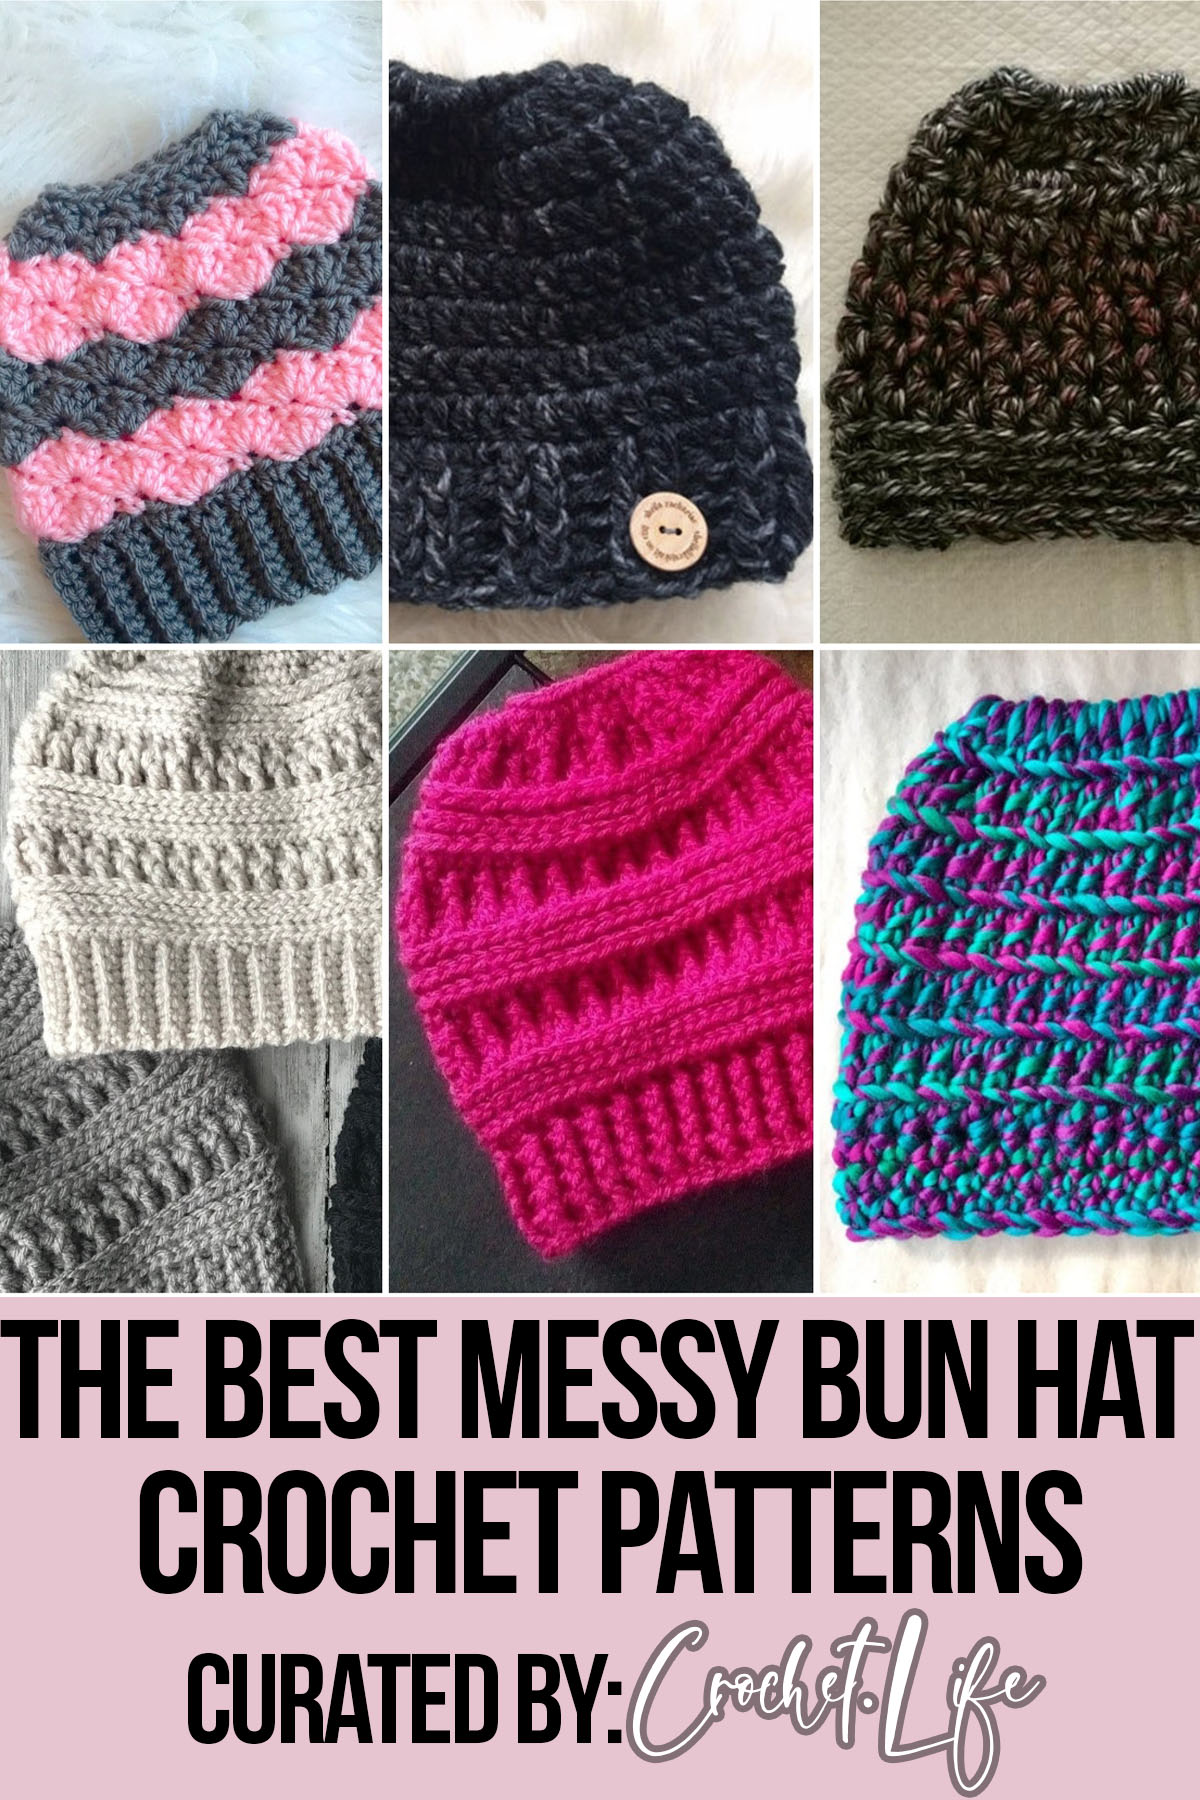 photo collage of easy winter hat crochet patterns with text which reads the best messy bun hat crochet patterns curated by crochet.life